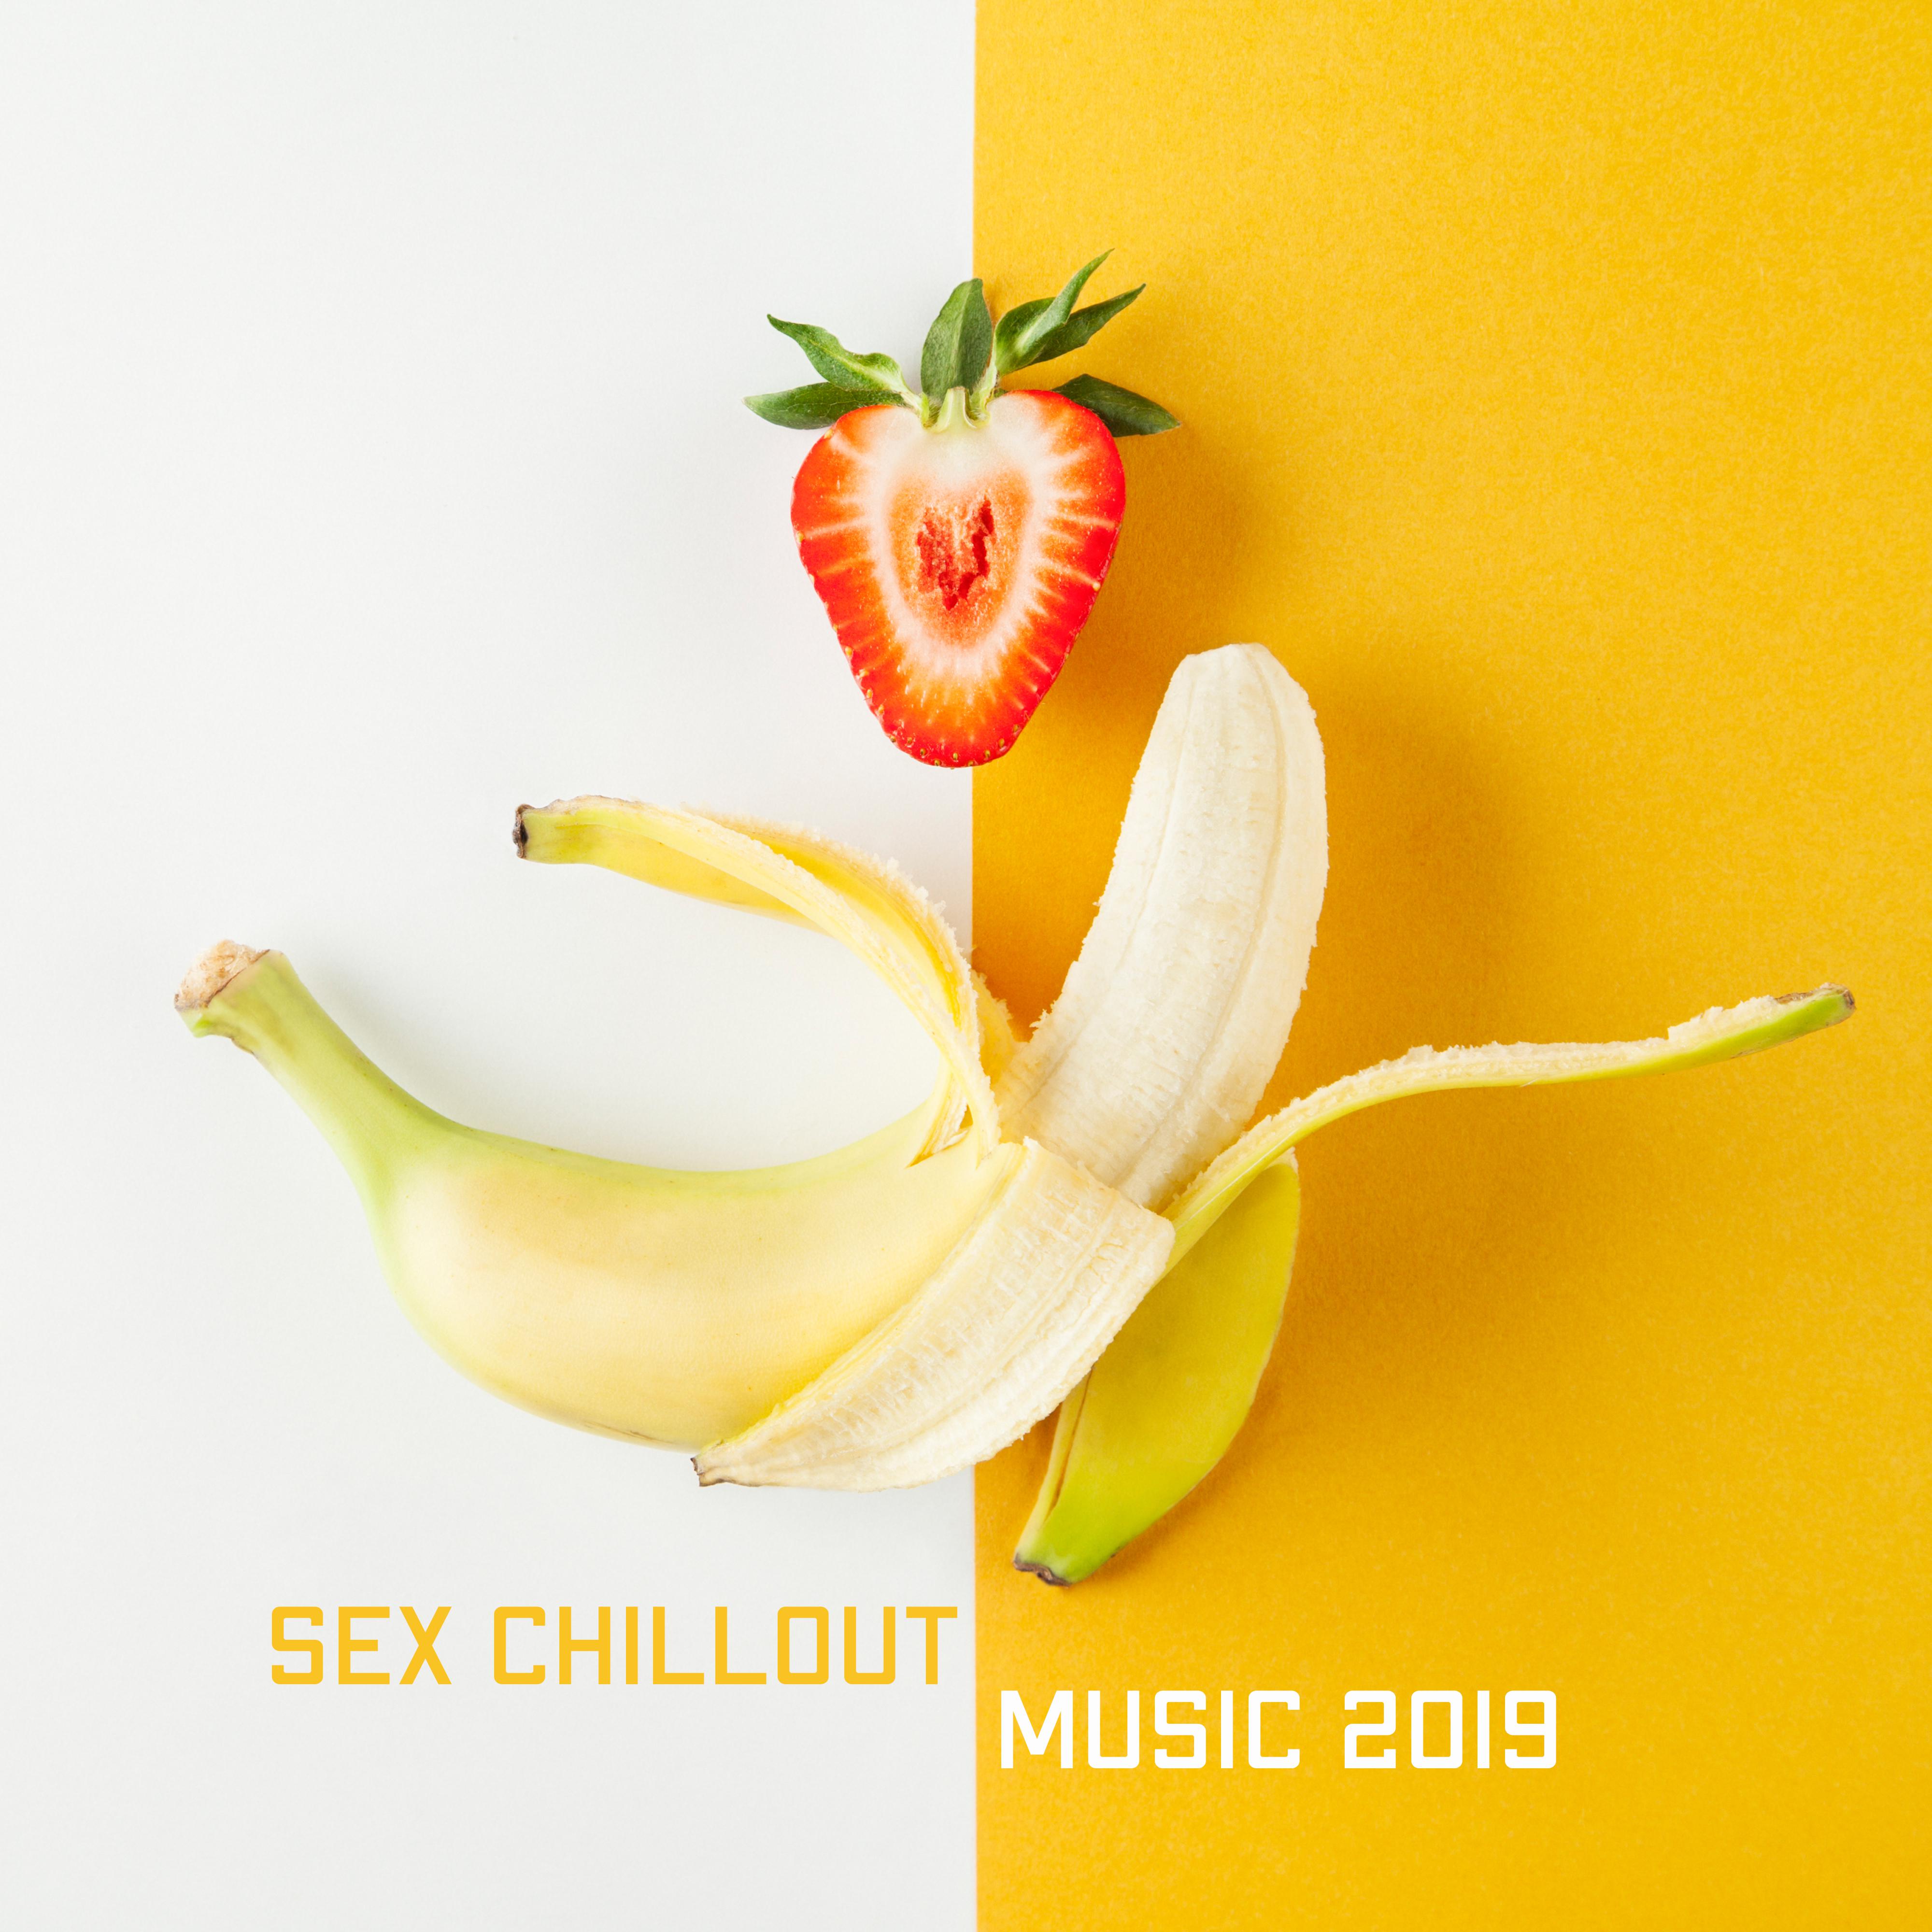 *** Chillout Music 2019 - The Most Romantic Musical Background for Erotic Caresses, Love Elations and Joy of Intimate Closeness with a Partner